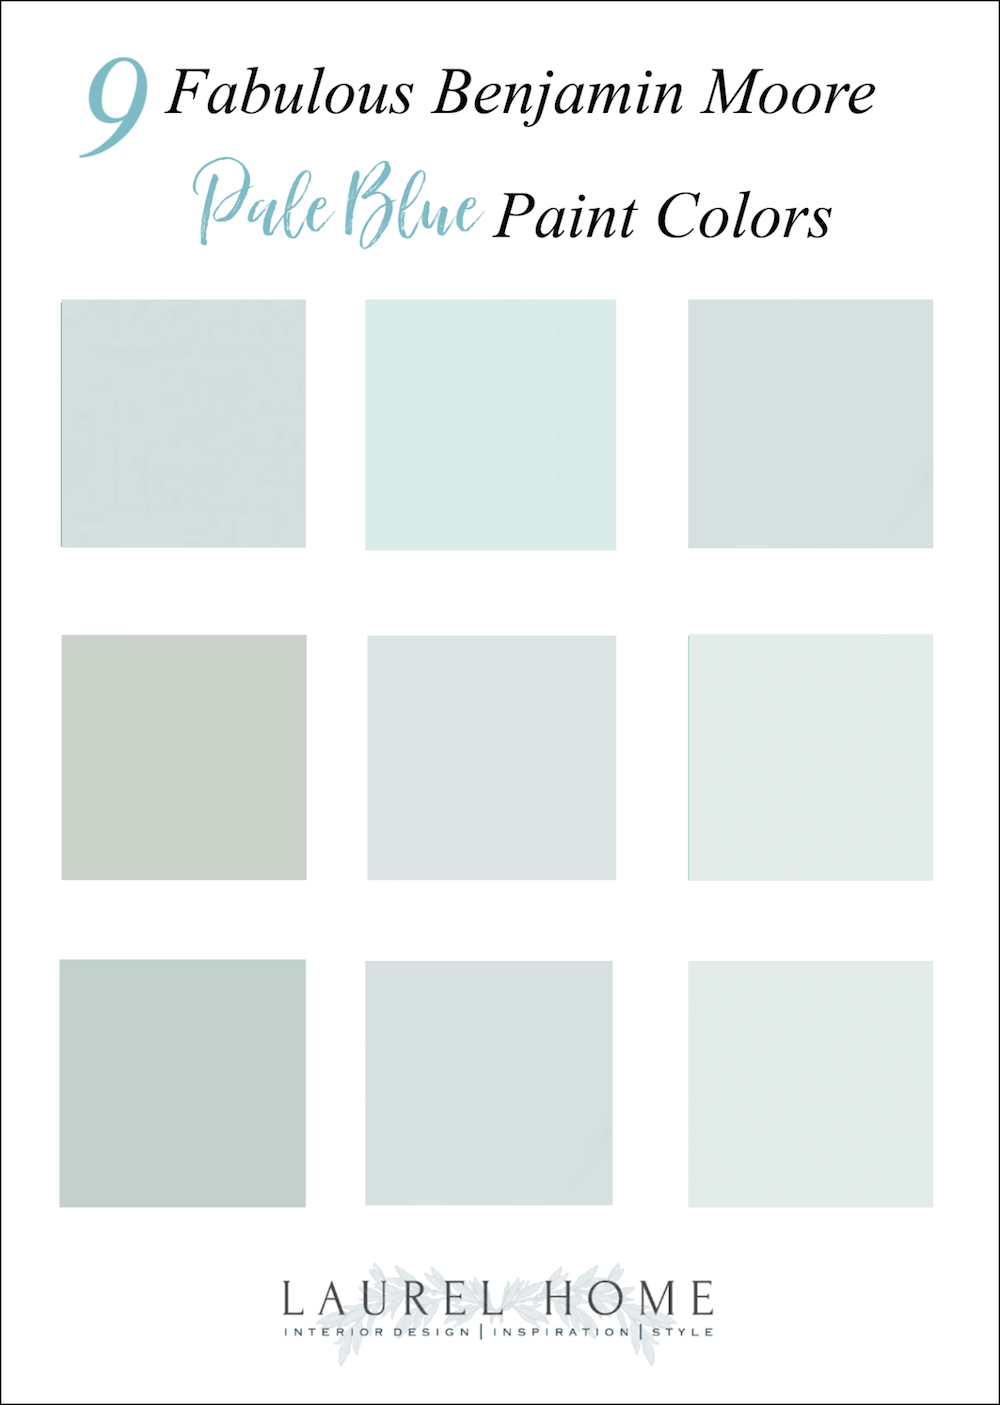 Light Blue Wall Colors-Don't This - Laurel Home